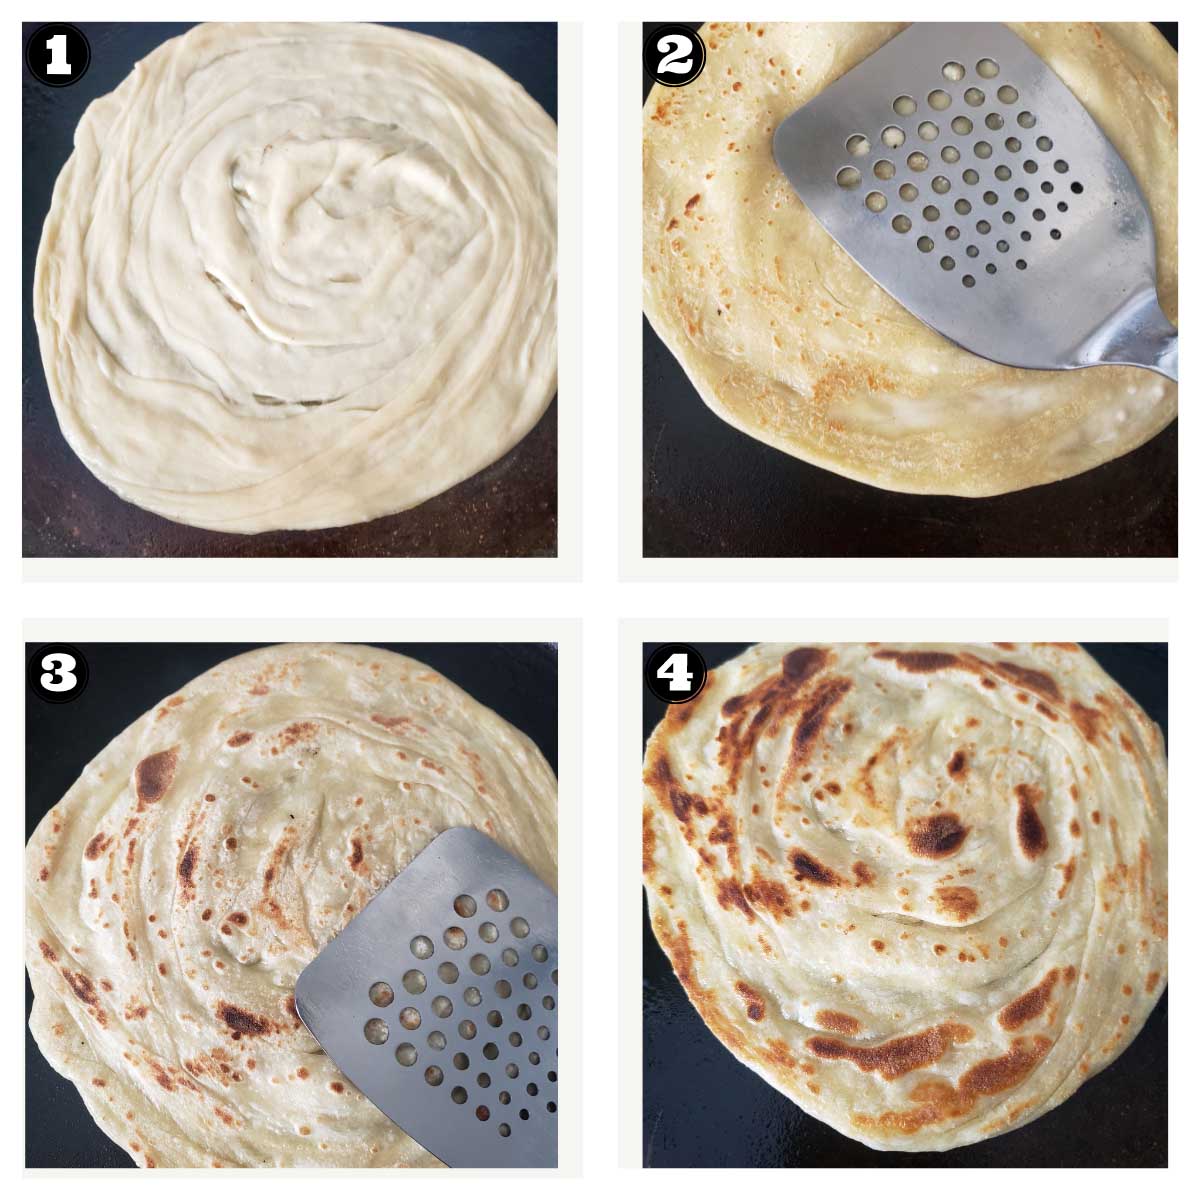 images showing steps involved in cooking the parotha